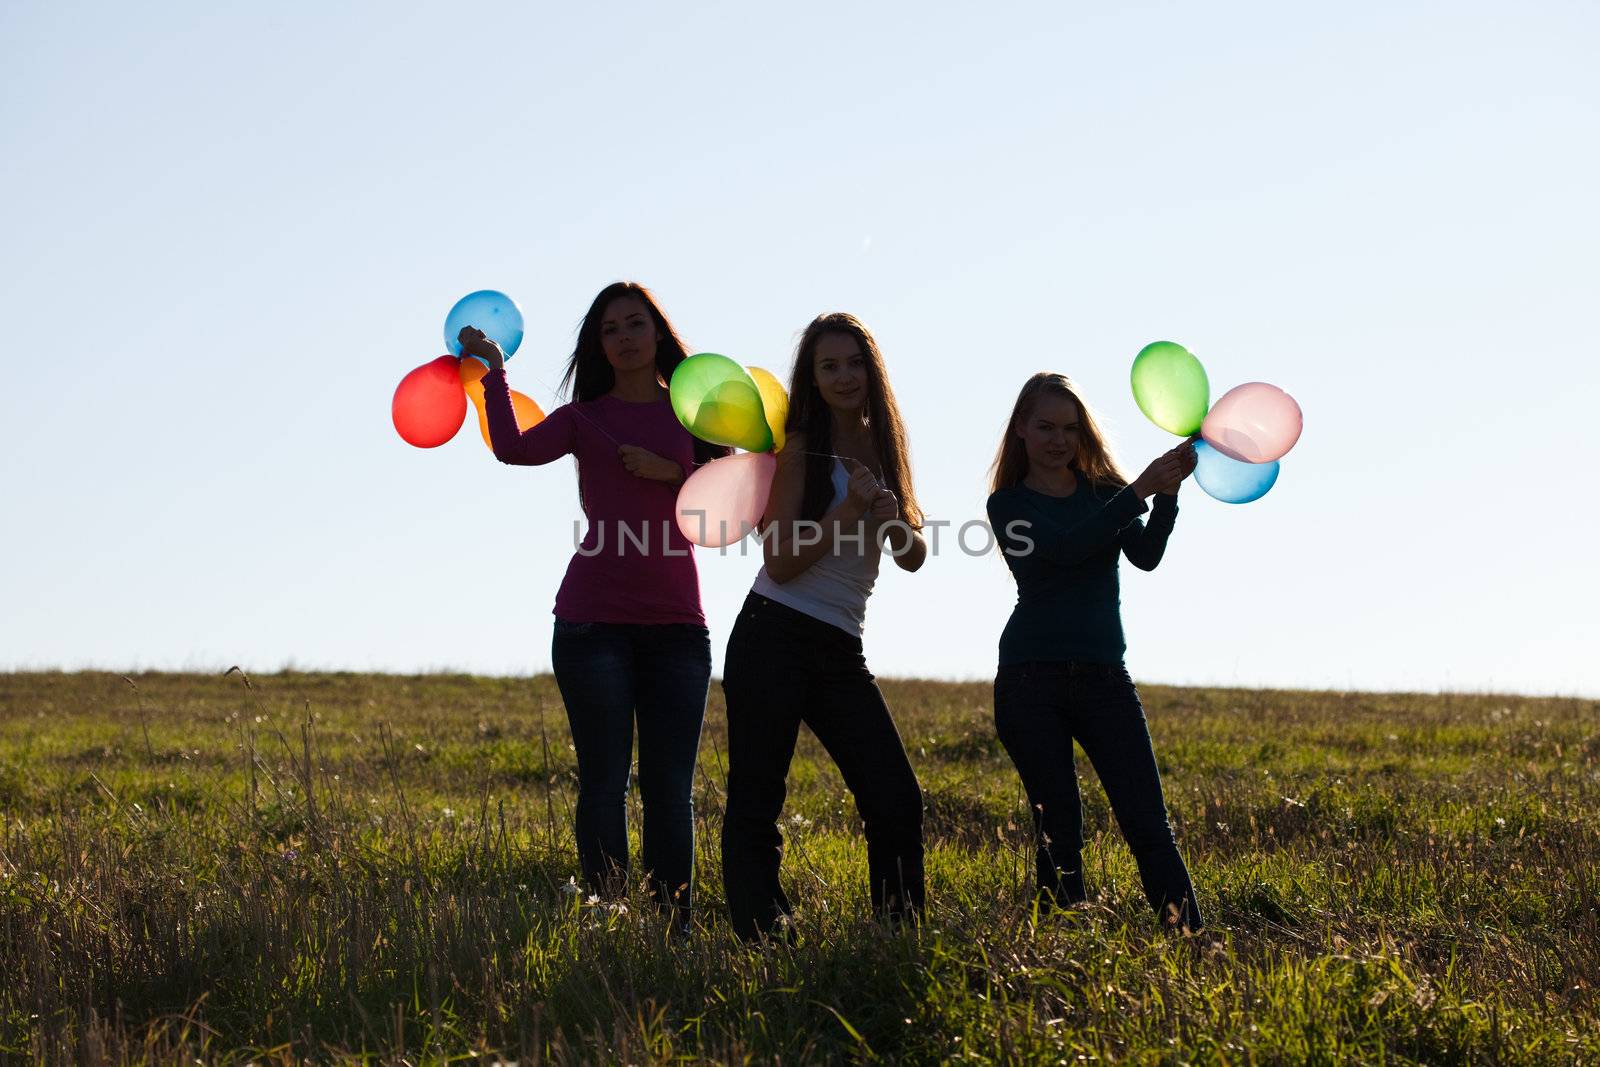 three young beautiful woman with balloons into the field against the sky